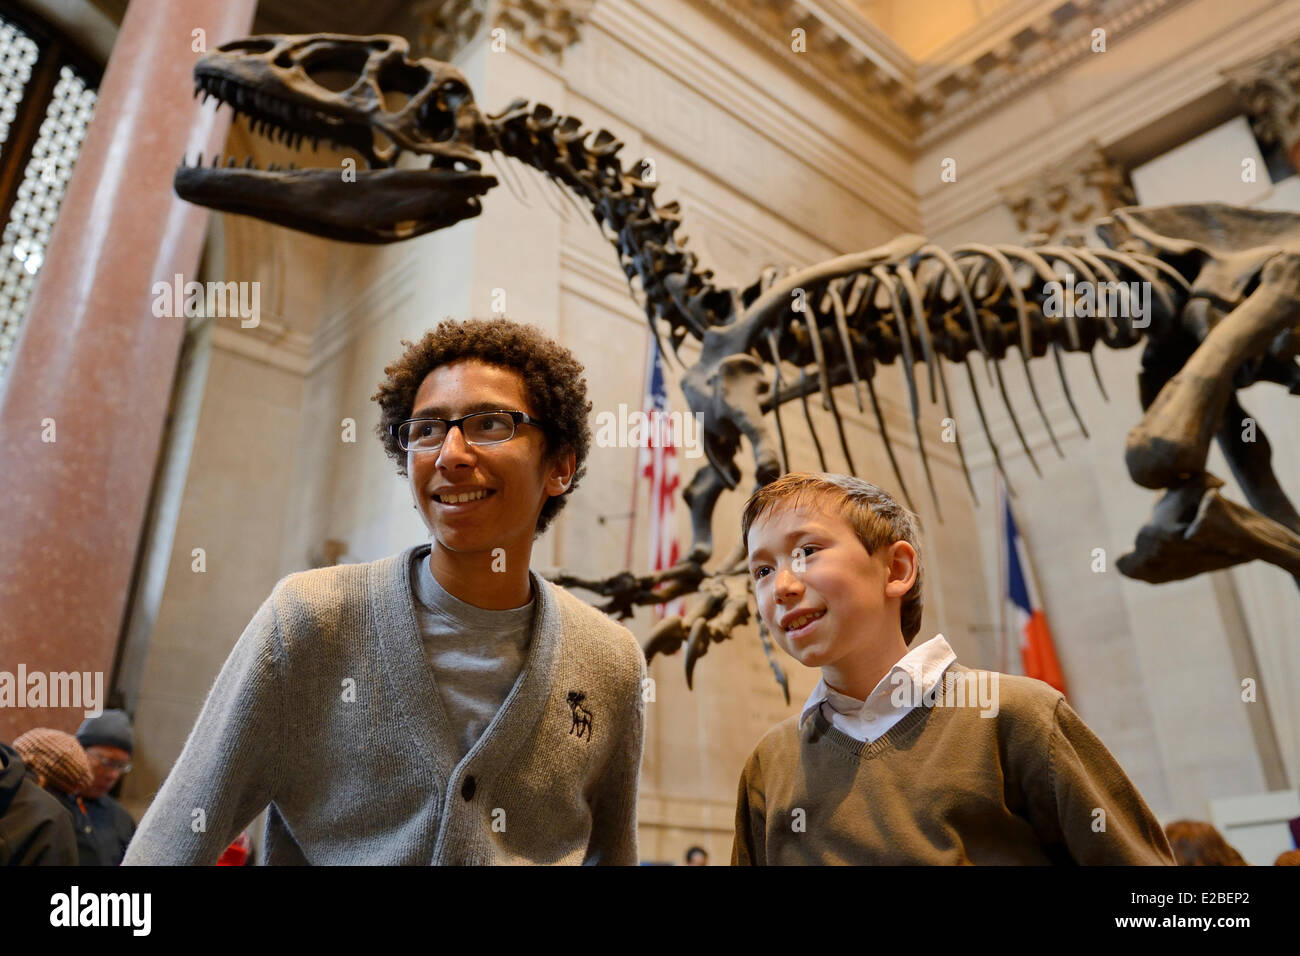 United States, New York City, Manhattan, Upper West Side, American Museum of Natural History, children in the Theodore Roosevelt Rotunda under the skeleton of a Apatosaurus Stock Photo